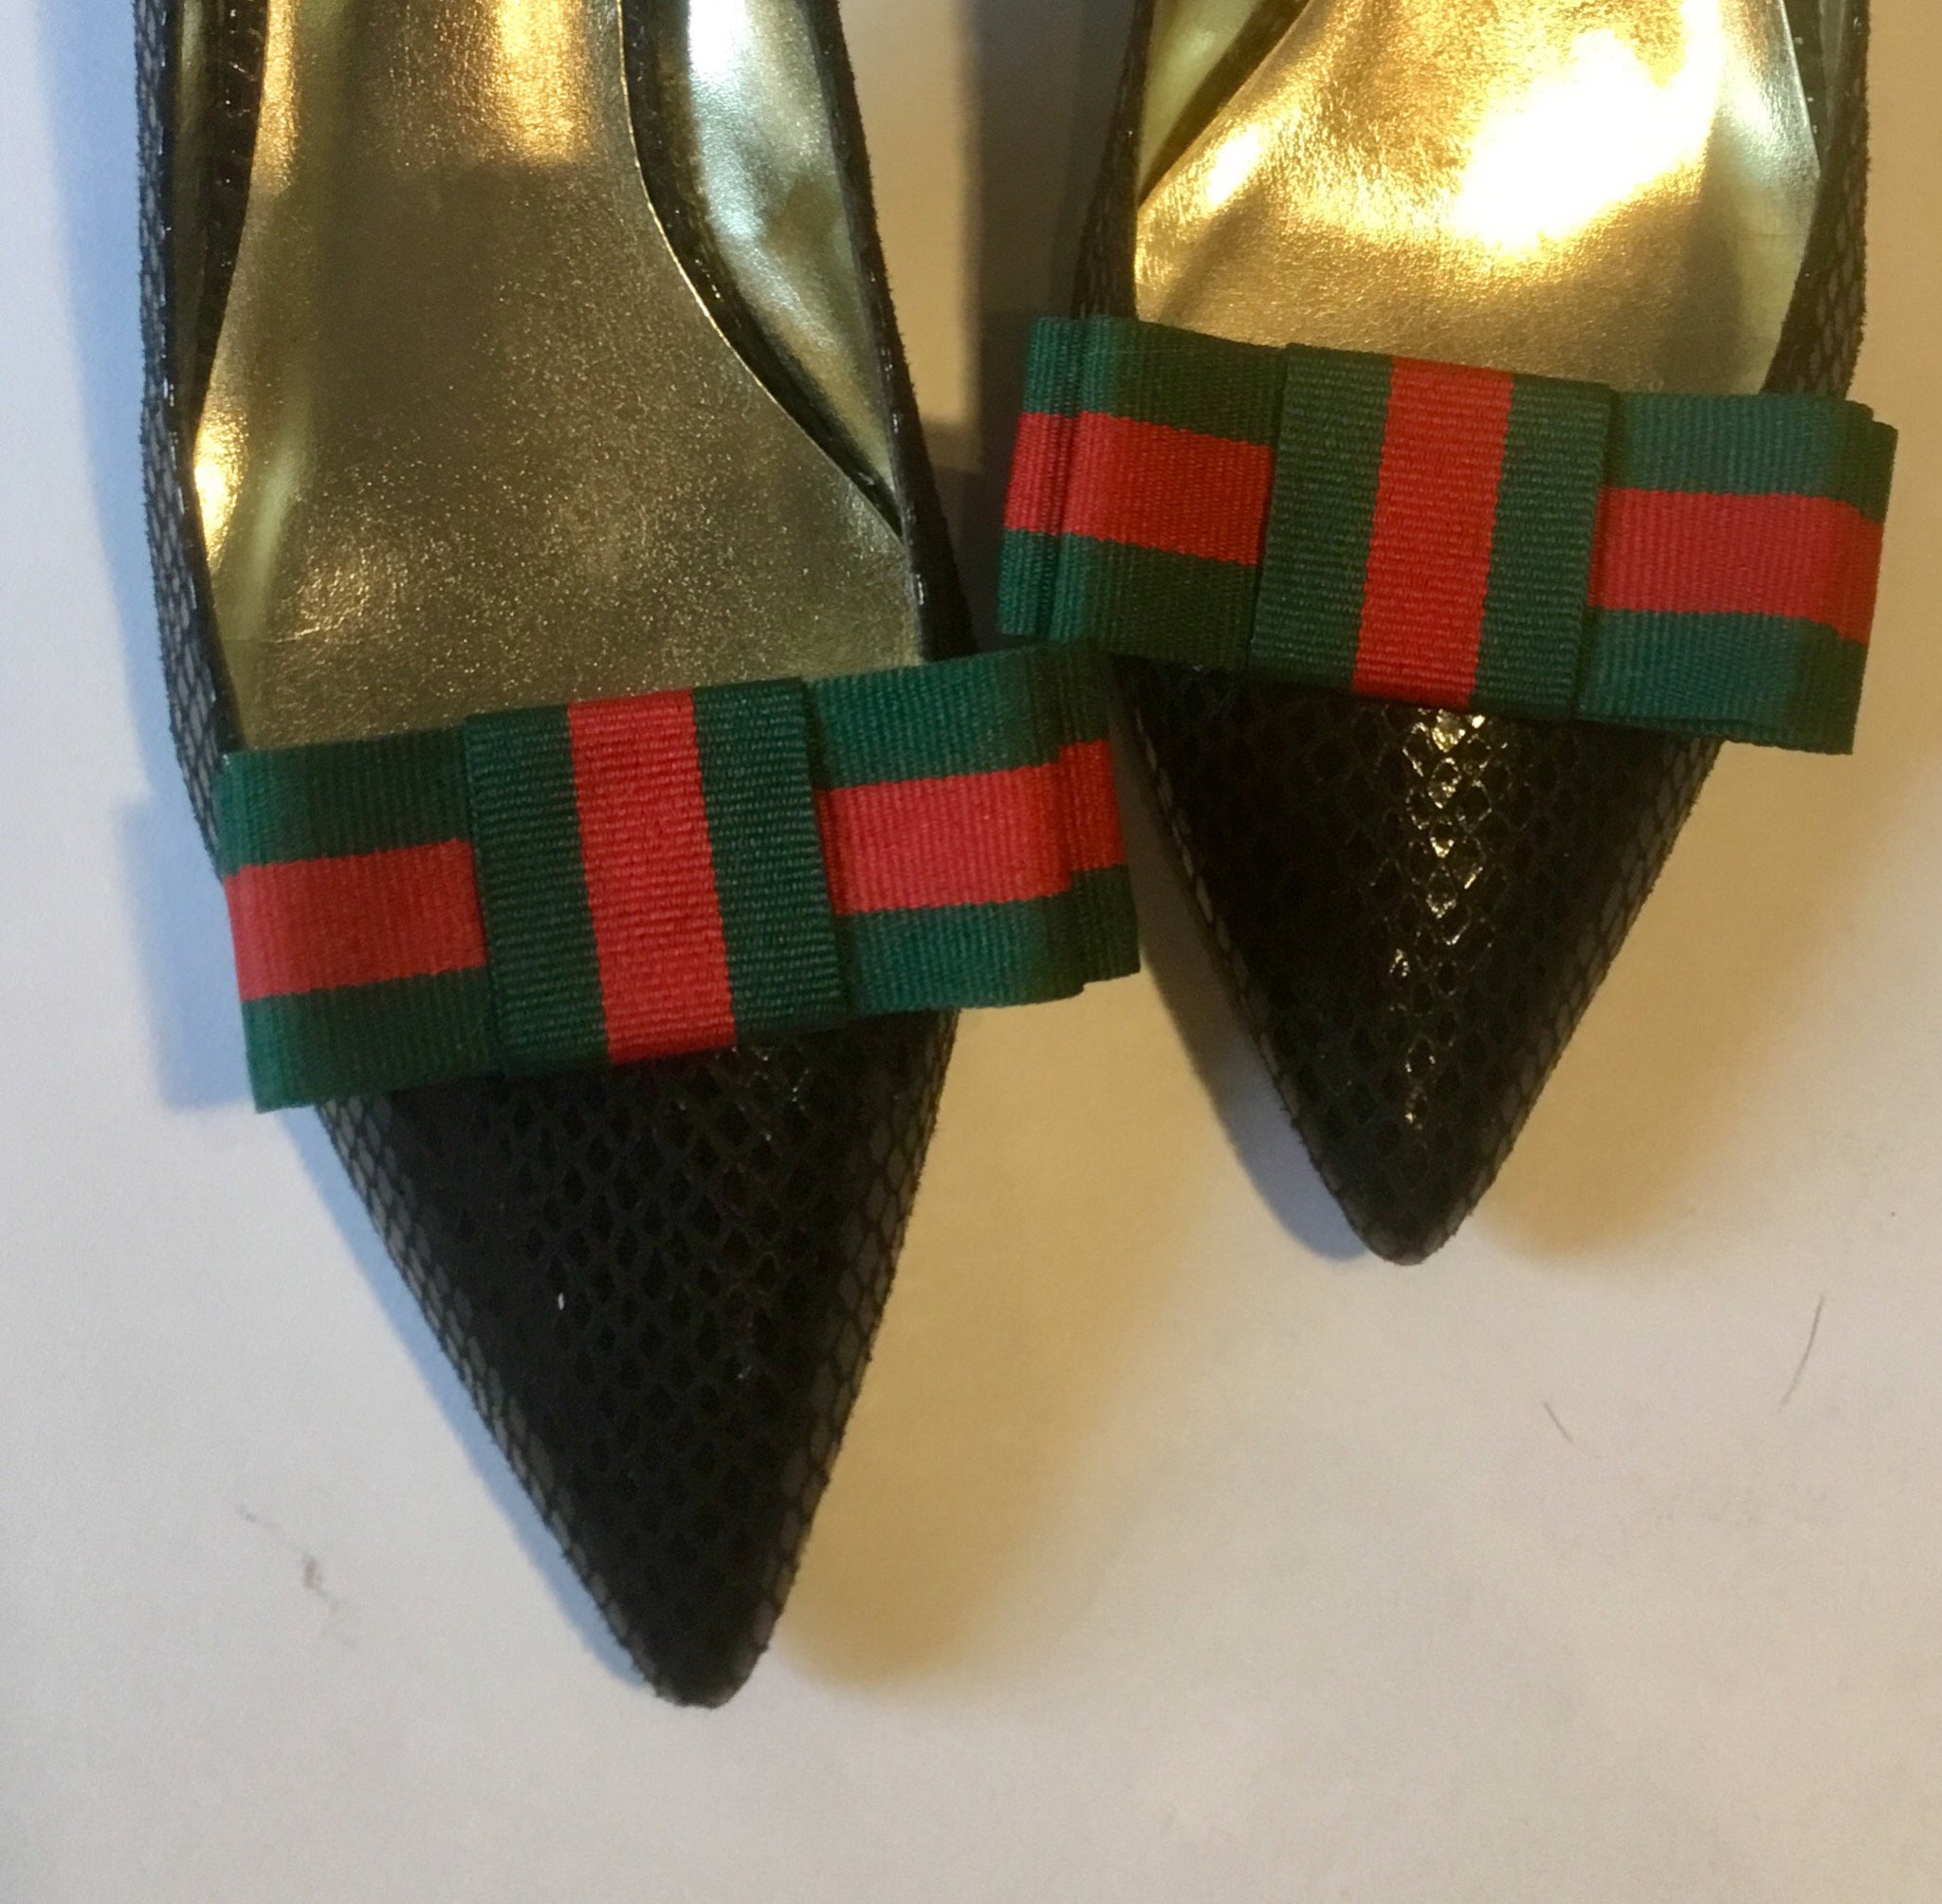 Designer Inspired Bee Shoe Clips, Green and Red Bee Shoe Clips, Red an –  Couture De South